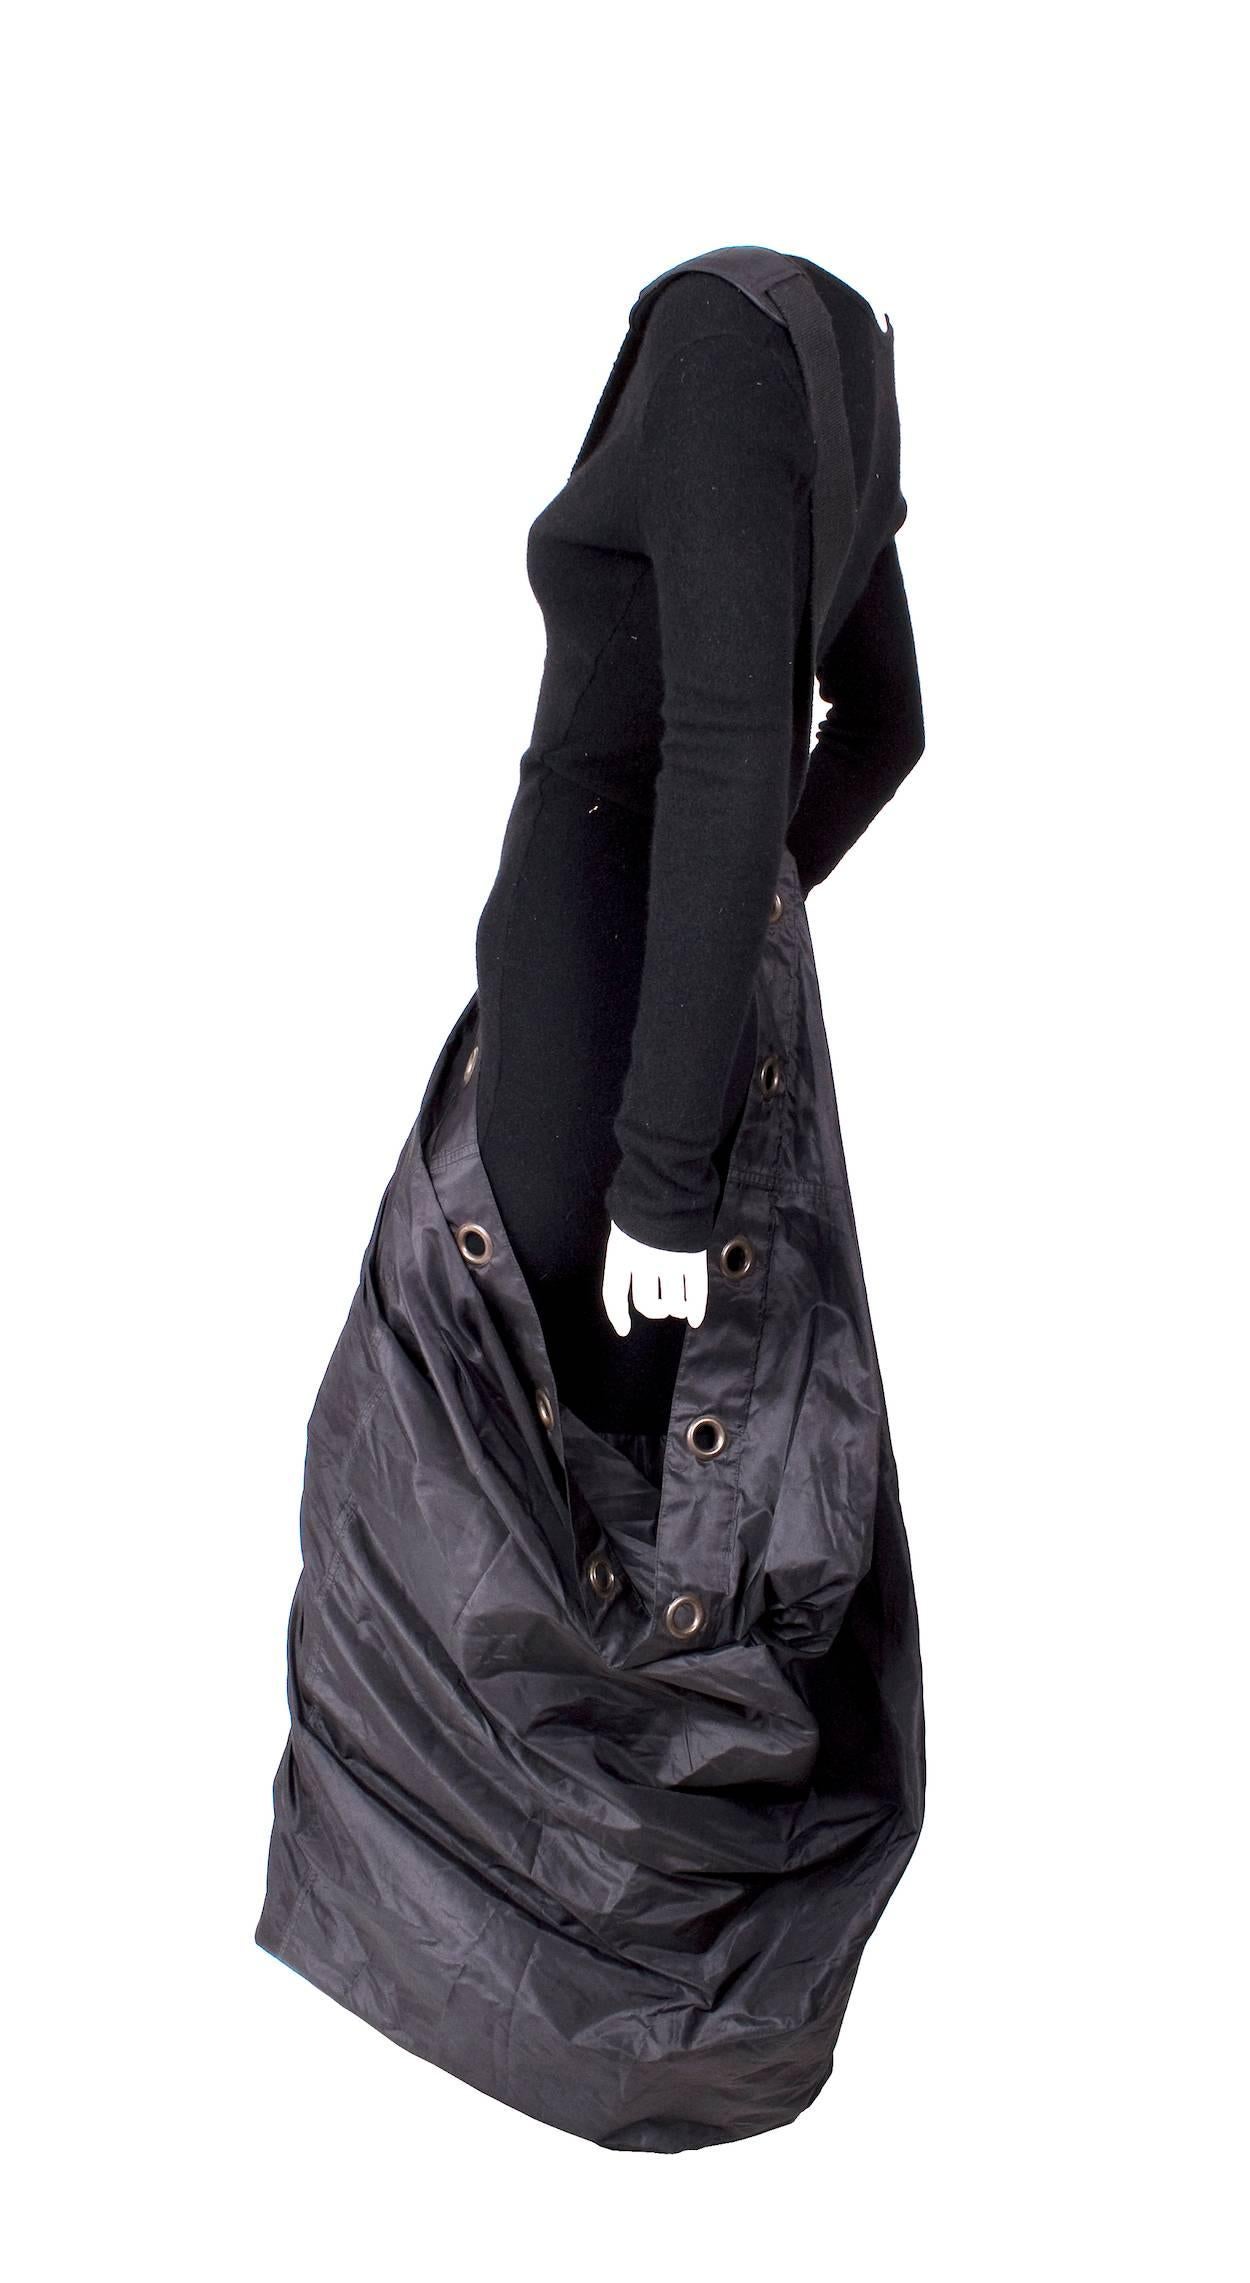 This is a dress by Jean Paul Gaultier c. 1990s.  The body is a black cashmere knit sweater and has a black nylon skirt with large grommets that is held up by a canvas shoulder strap.  

18" shoulder to shoulder
27" long sleeves